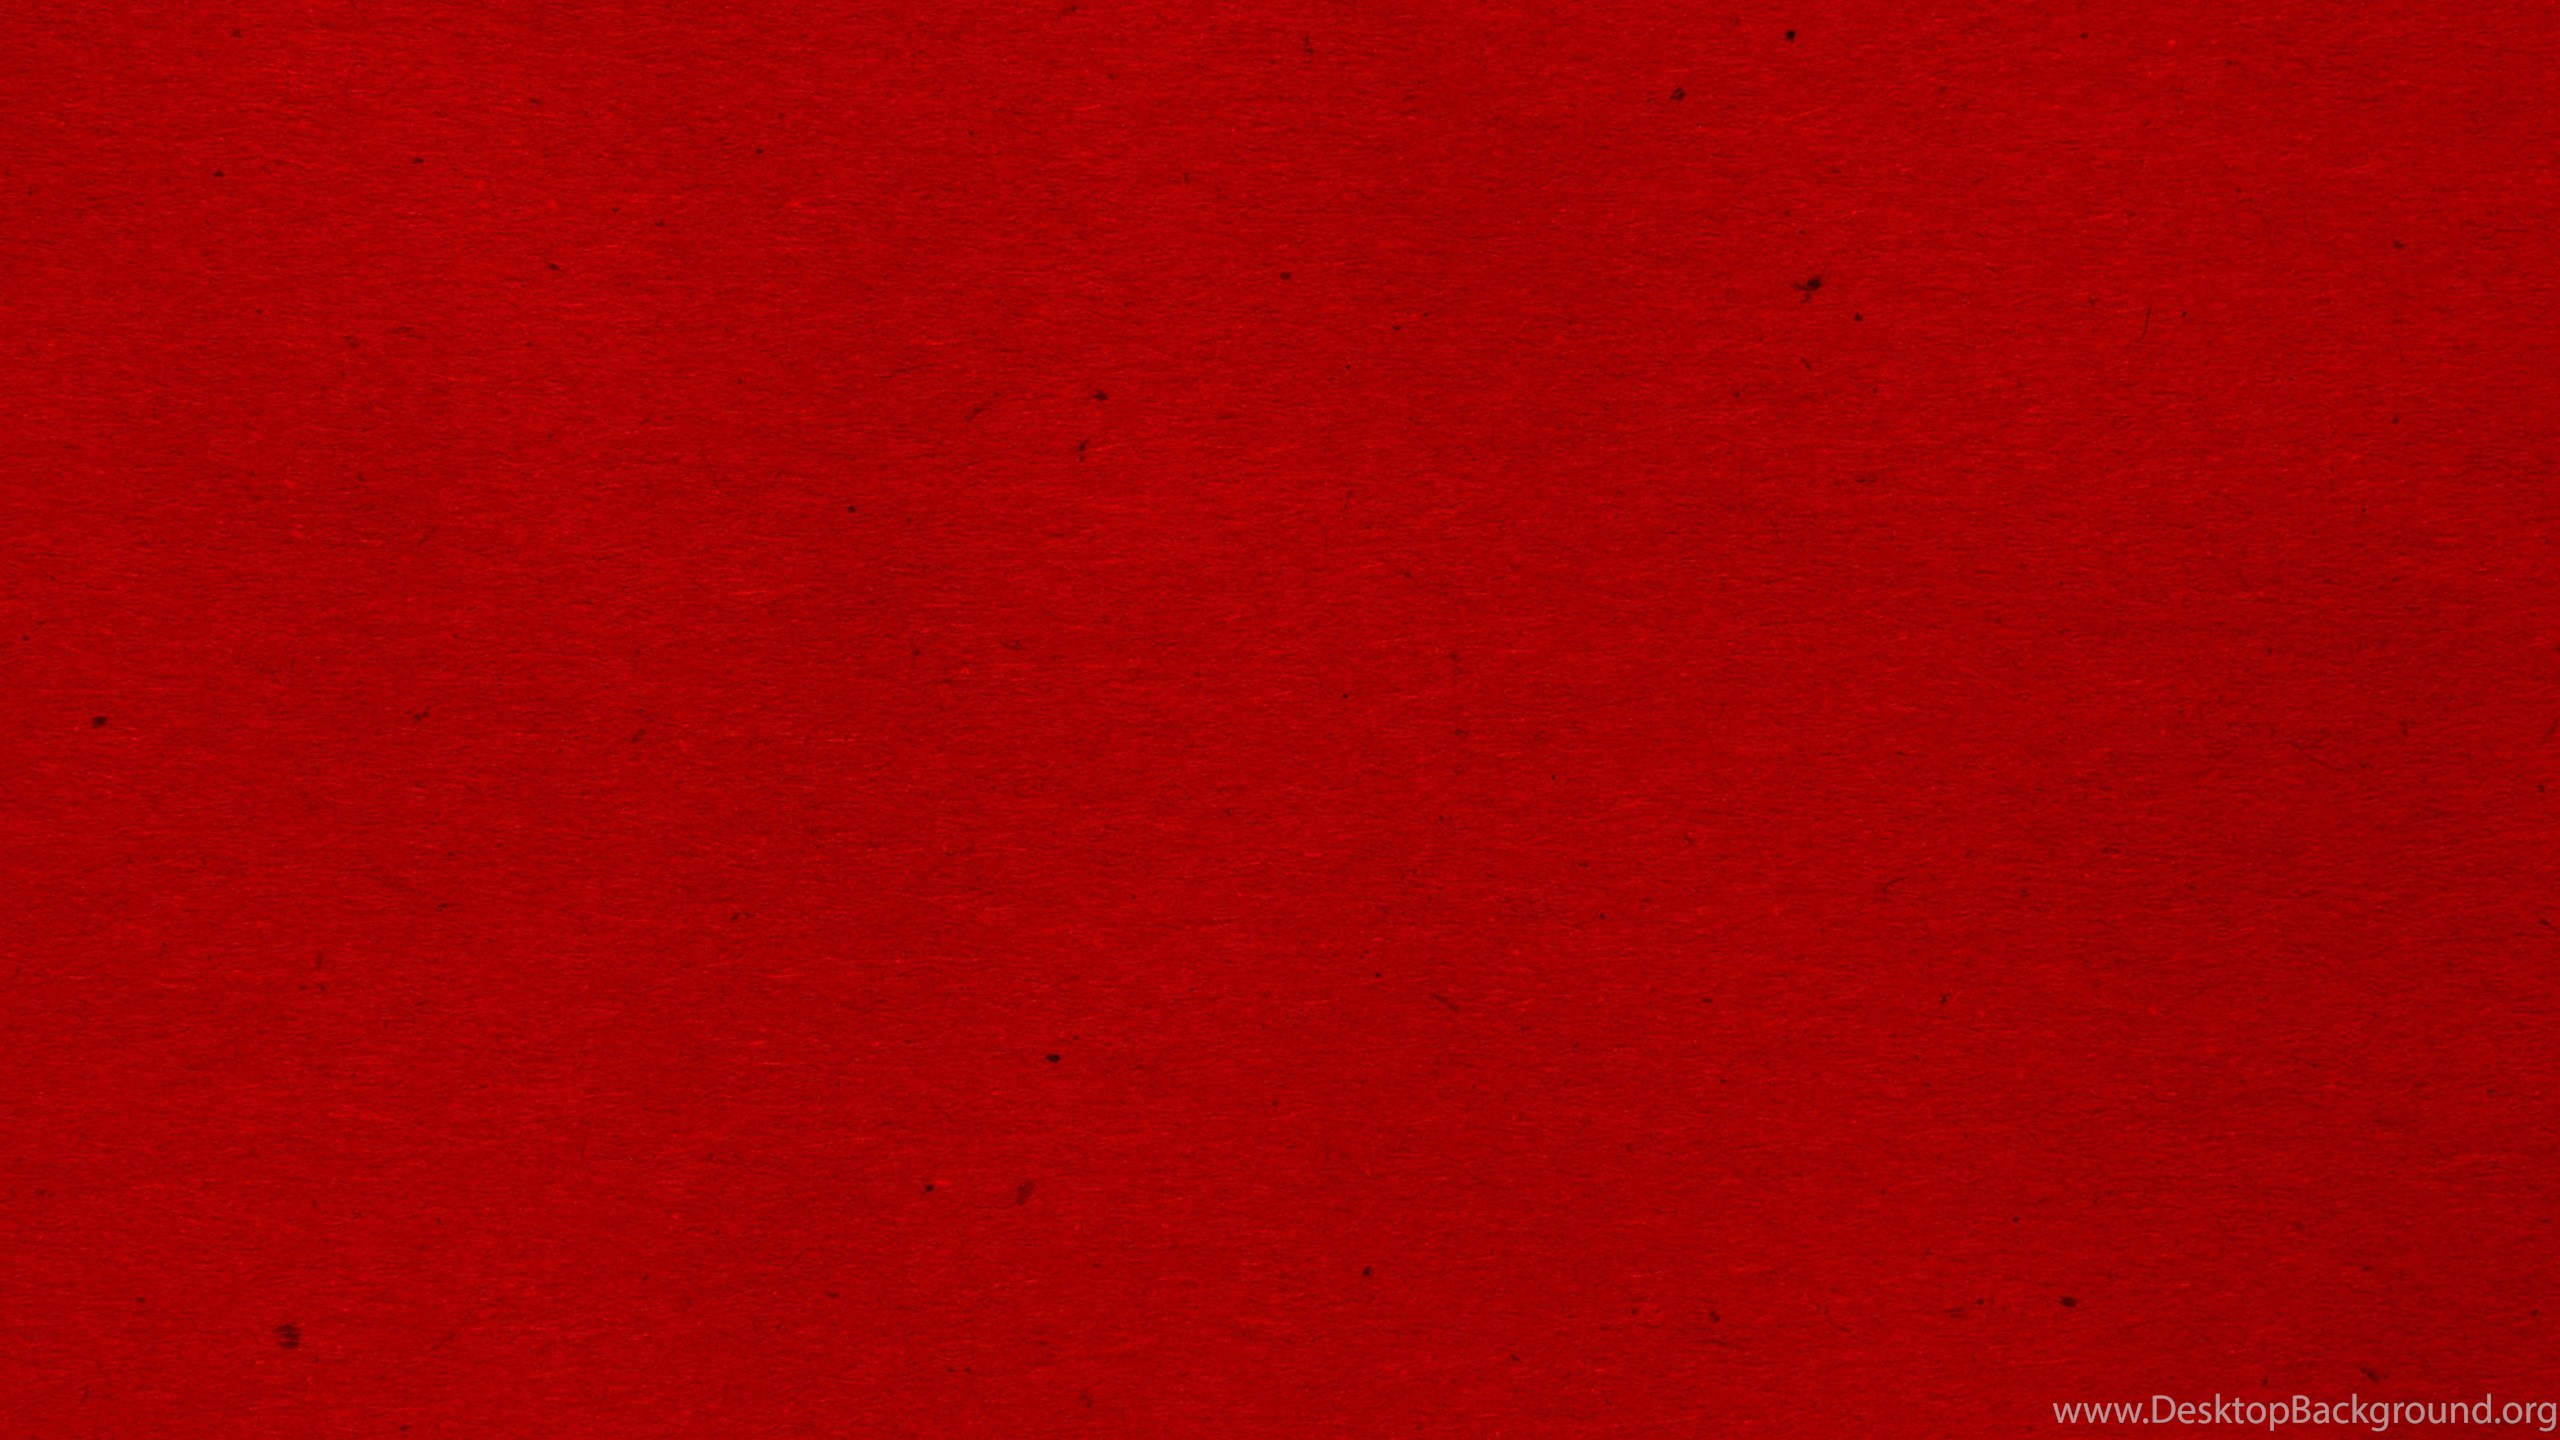 Deep Red Paper Texture With Flecks Picture Desktop Background